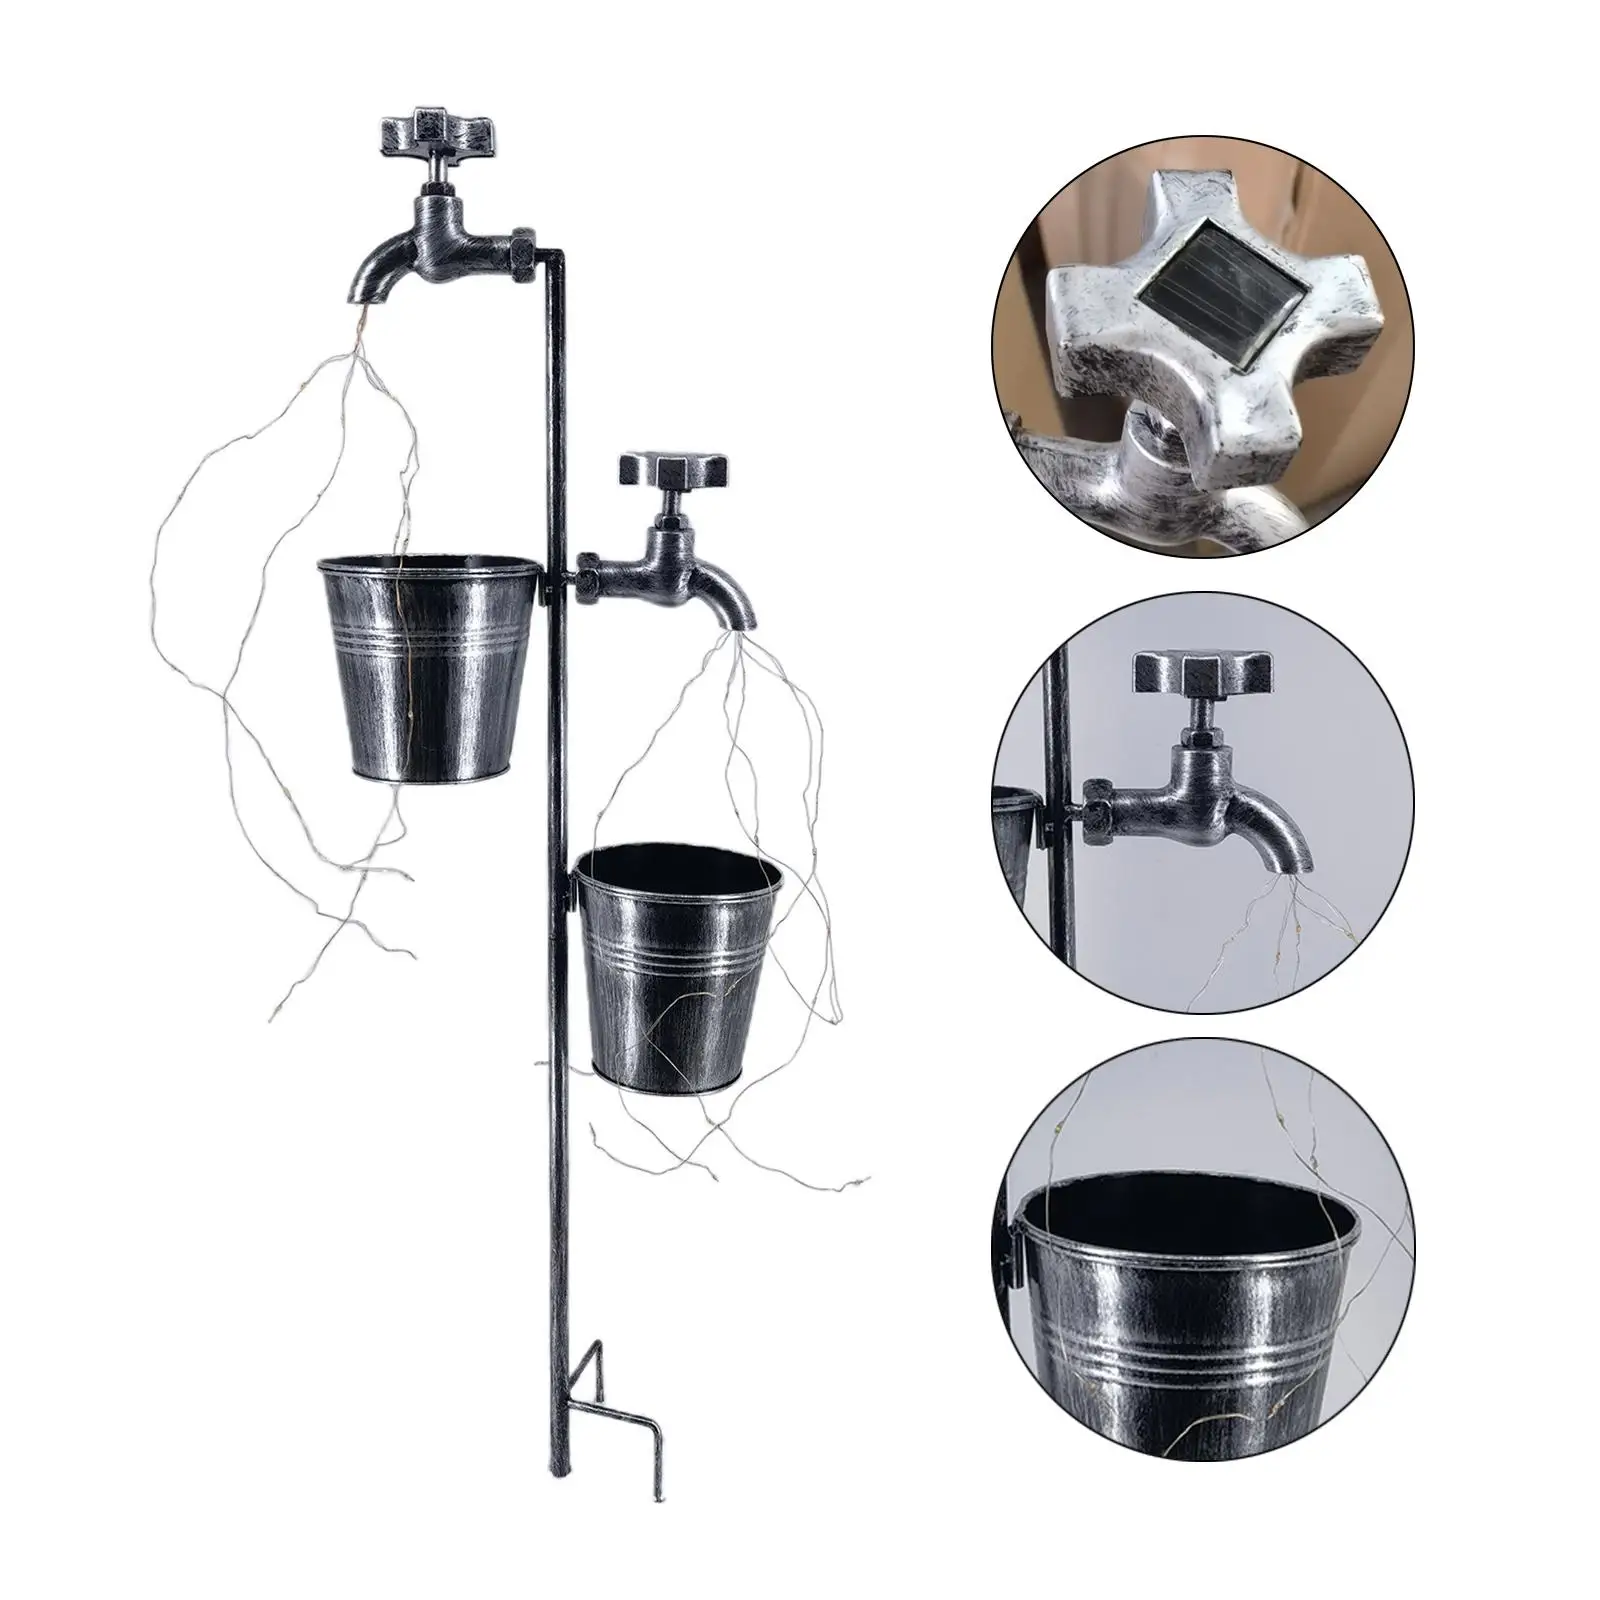 Solar Powered Double Faucets & Water Buckets Sprinkles Star String Lights for Garden Outdoor Party Decoration Summer Lighting